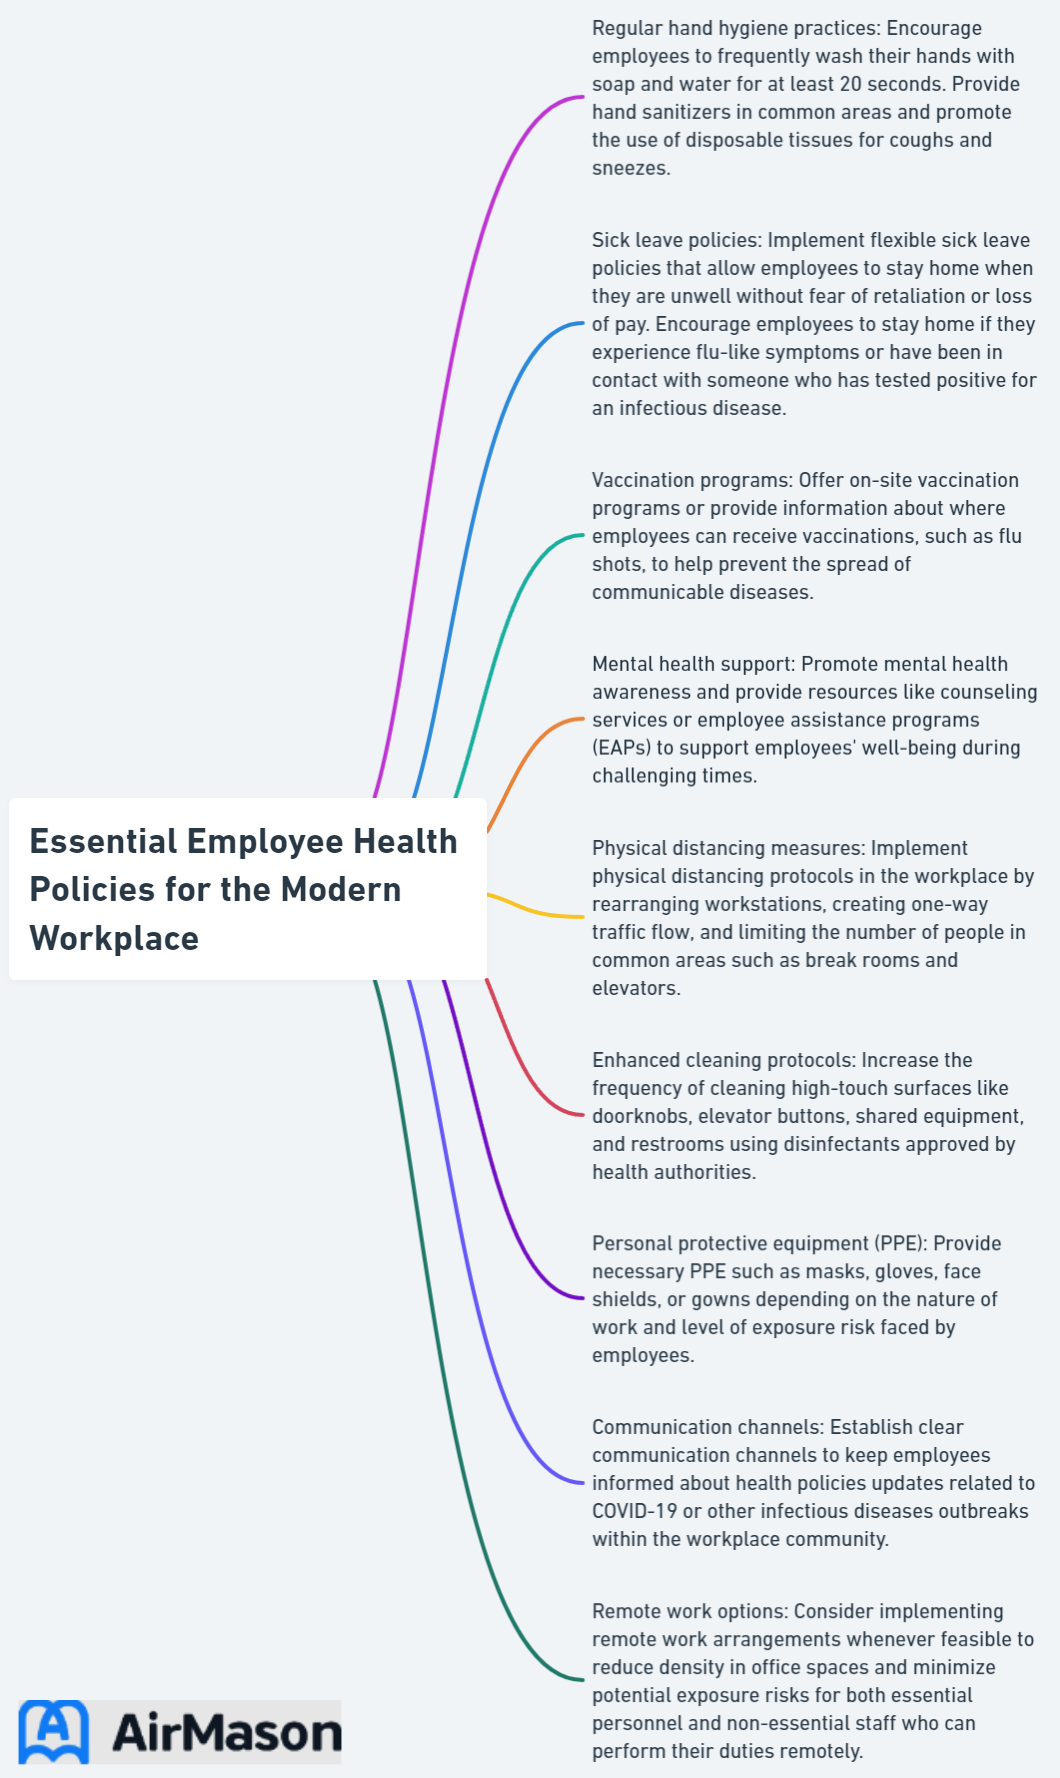 Essential Employee Health Policies for the Modern Workplace